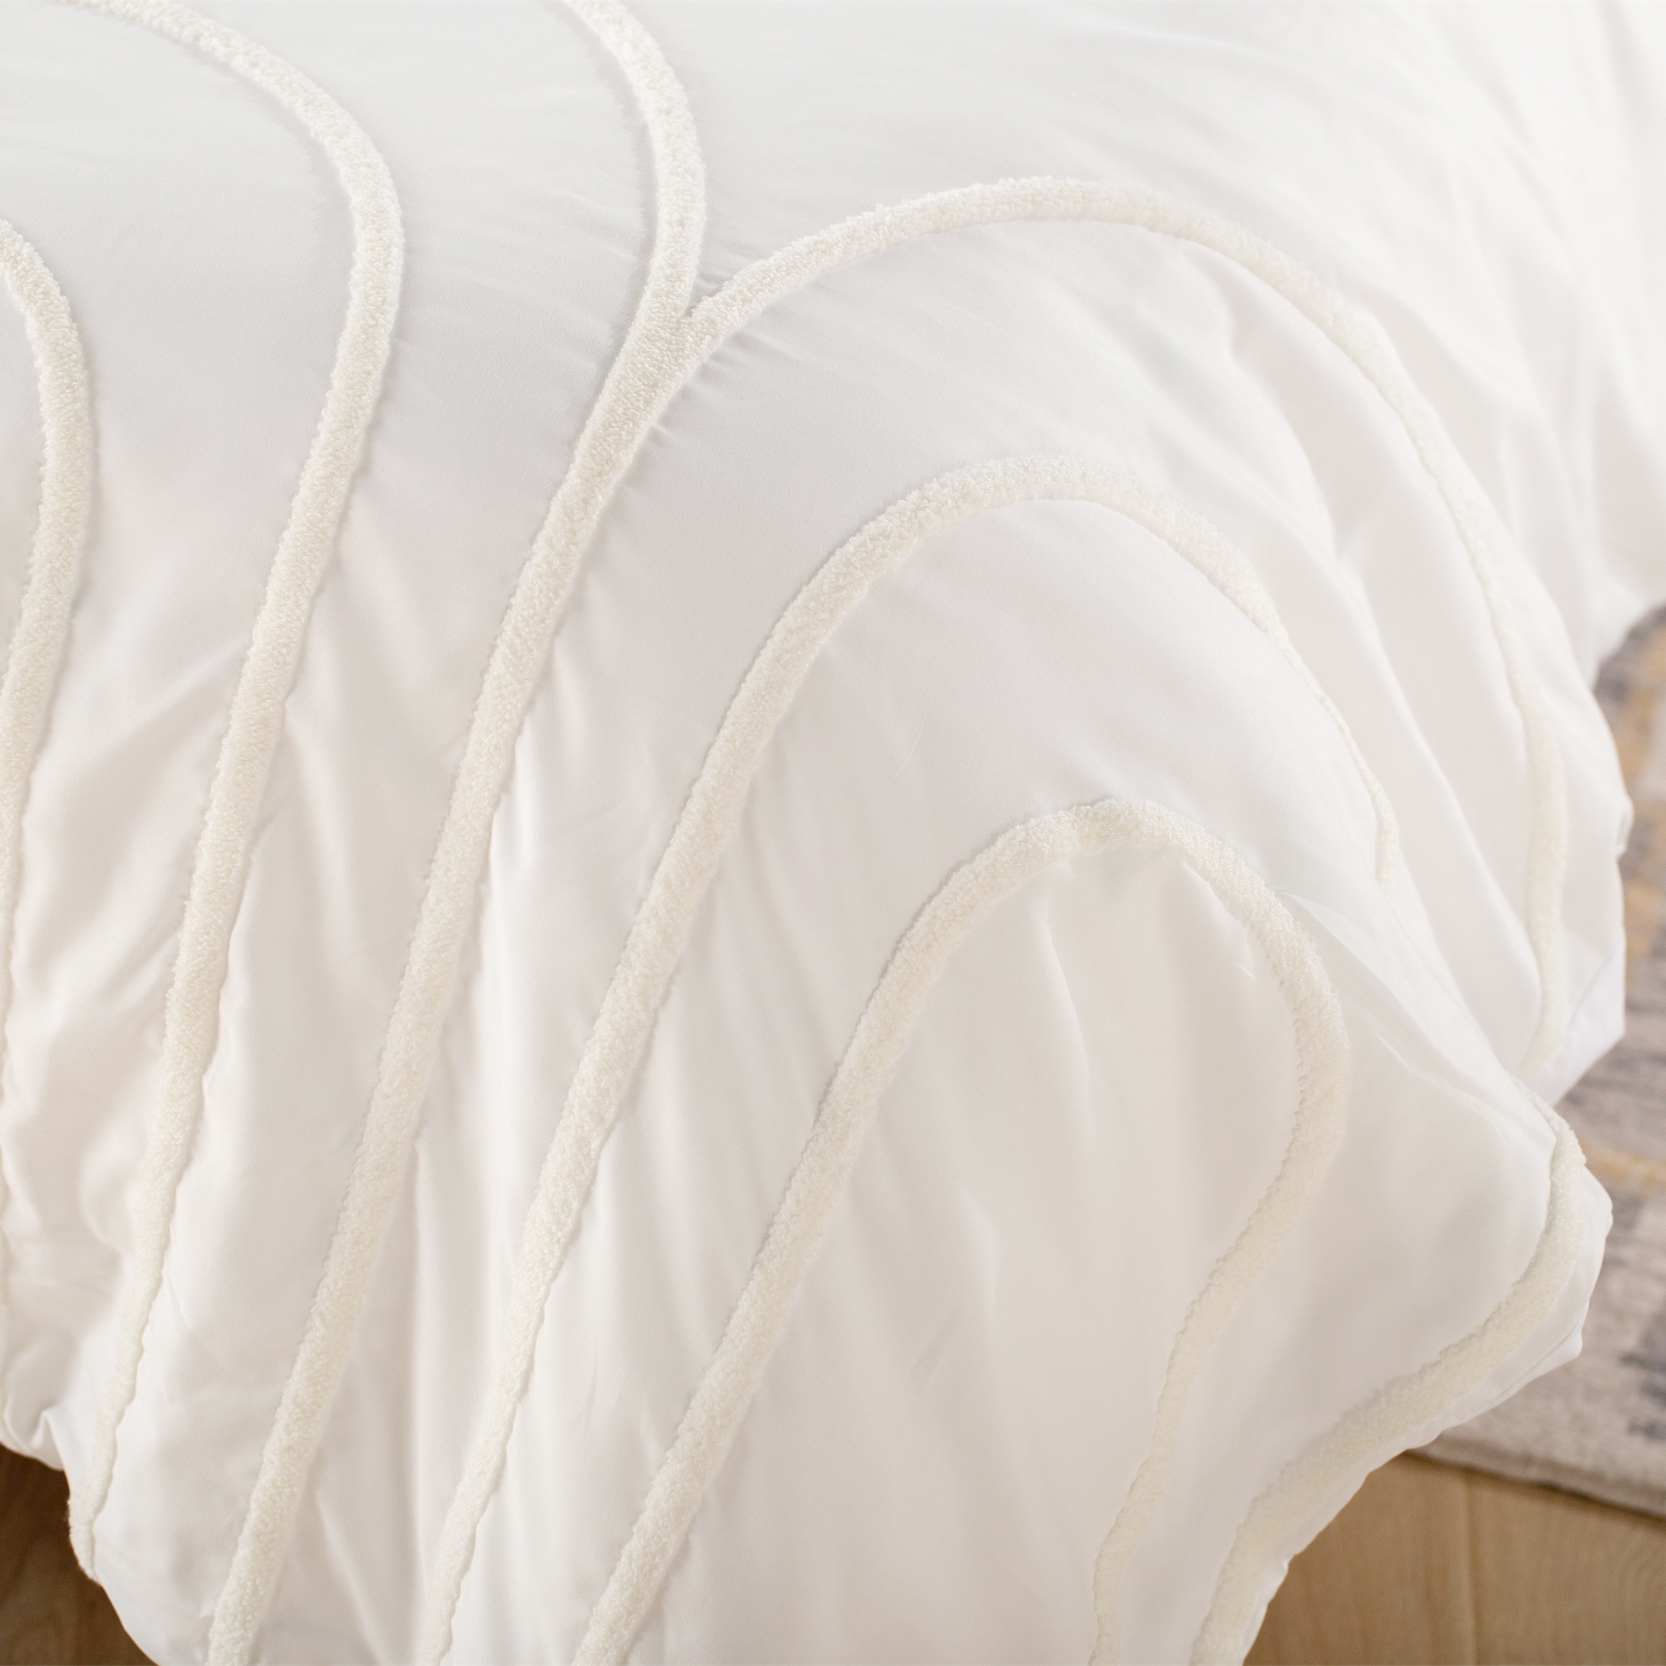 Delight Home tufted embroidery duvet cover